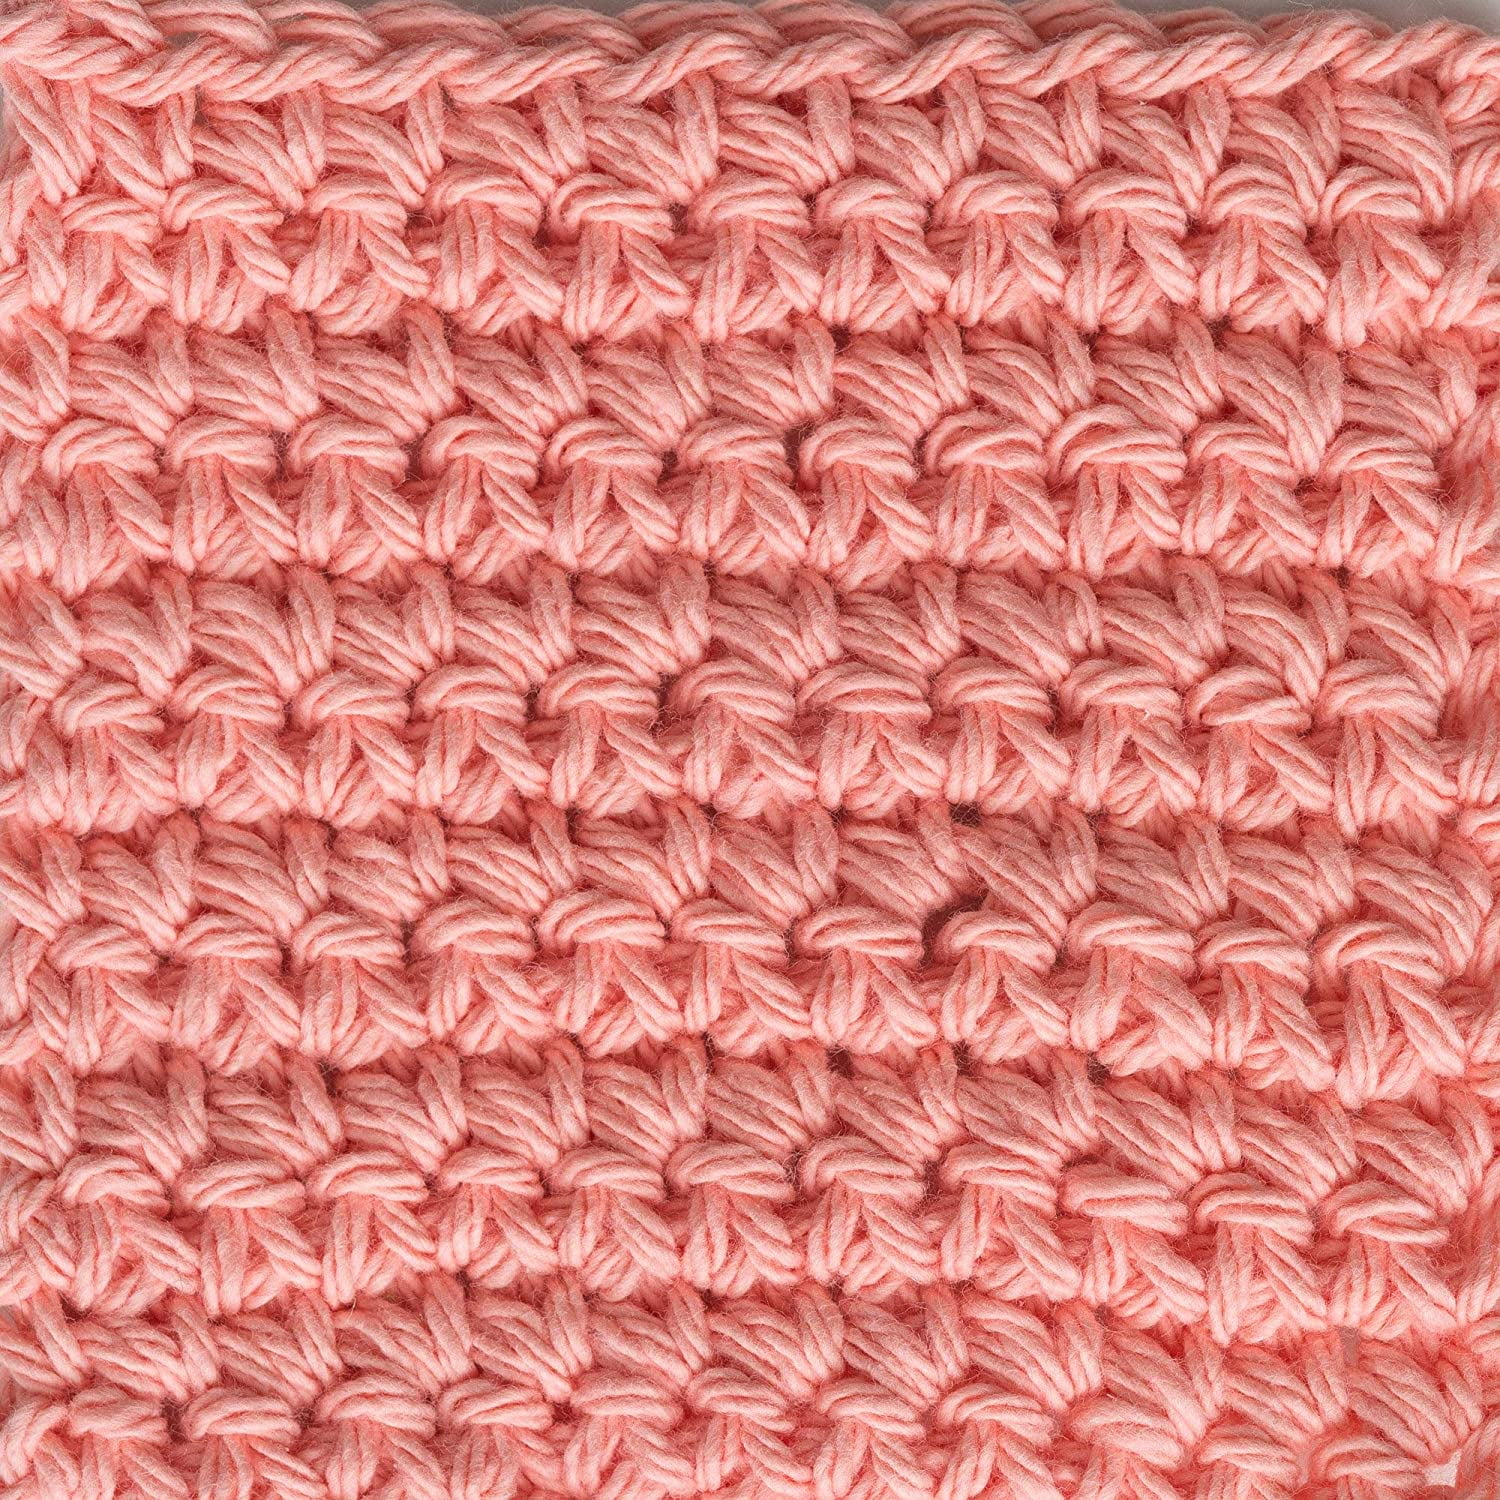 Lily Sugar'n Cream Yarn - Solids Super Size-Hot Pink, 1 count - Fry's Food  Stores